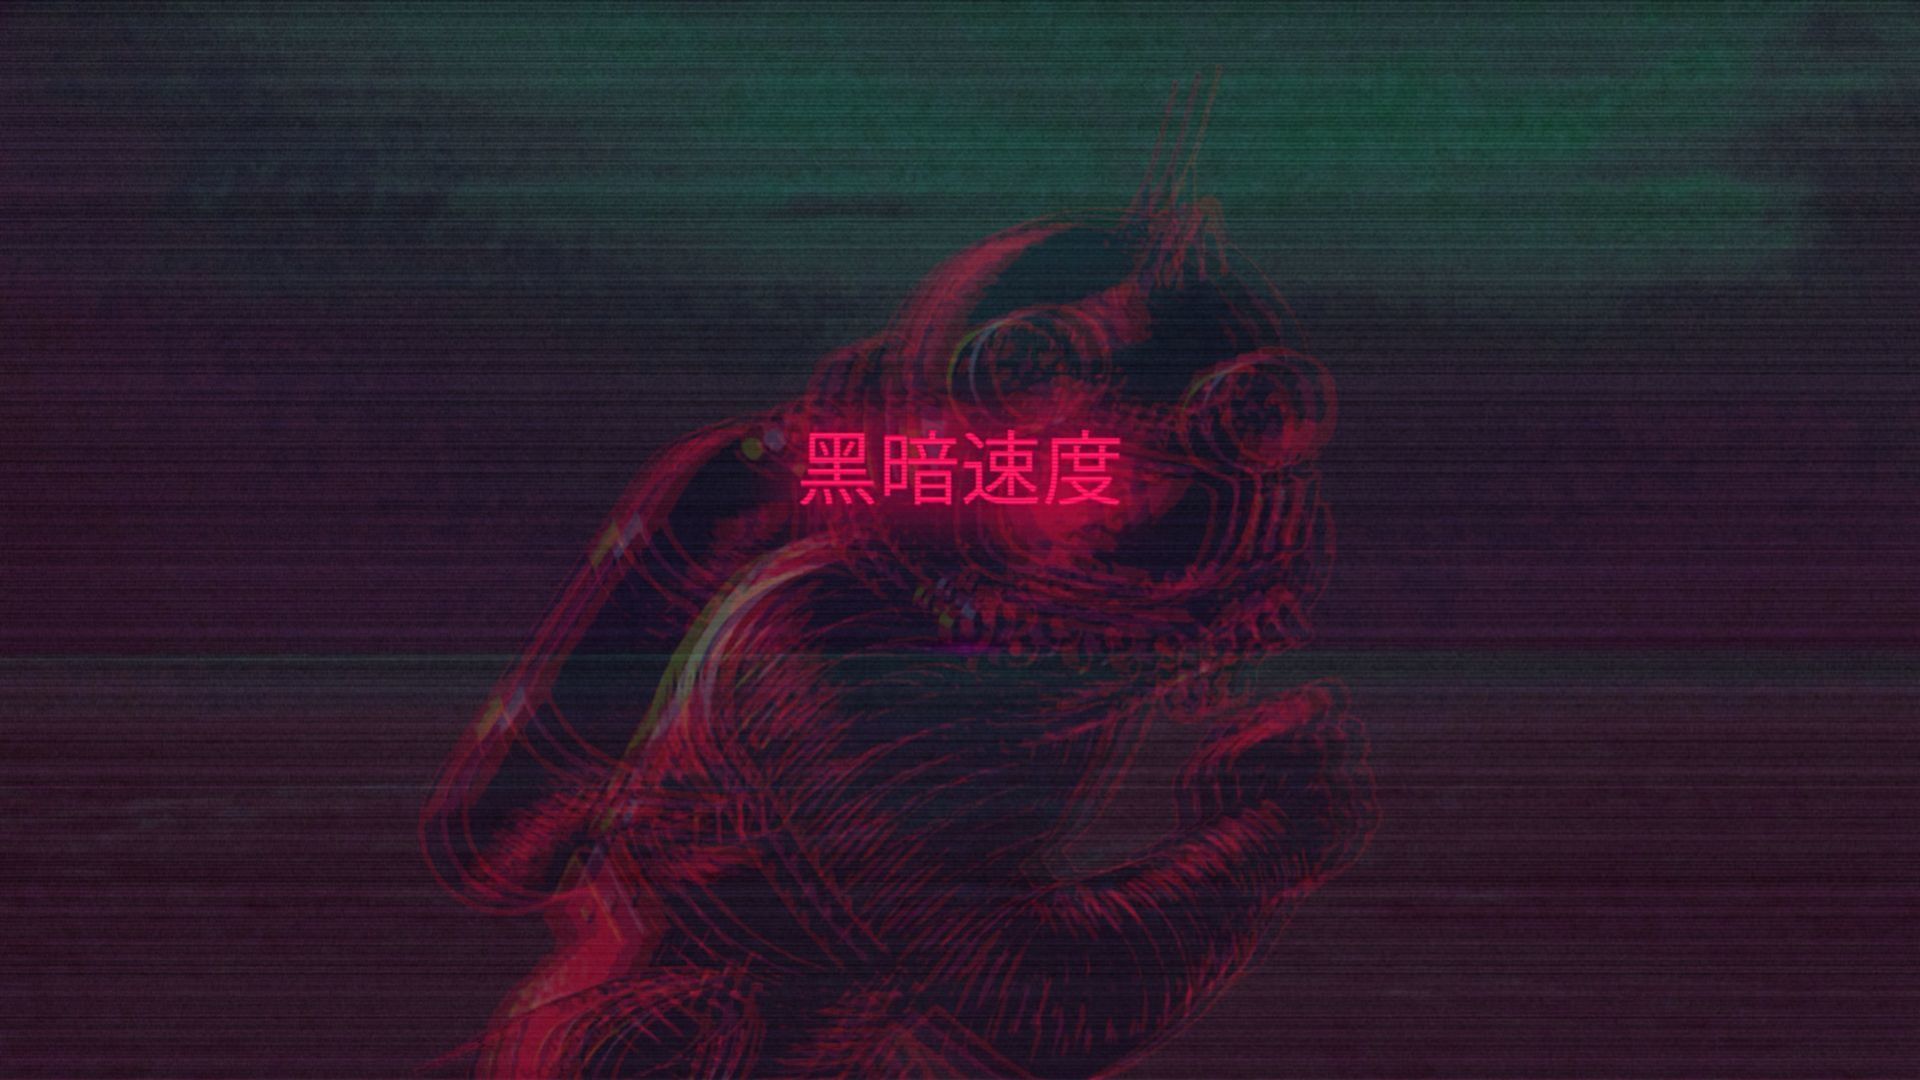 Red and Black Aesthetic Laptop Wallpaper